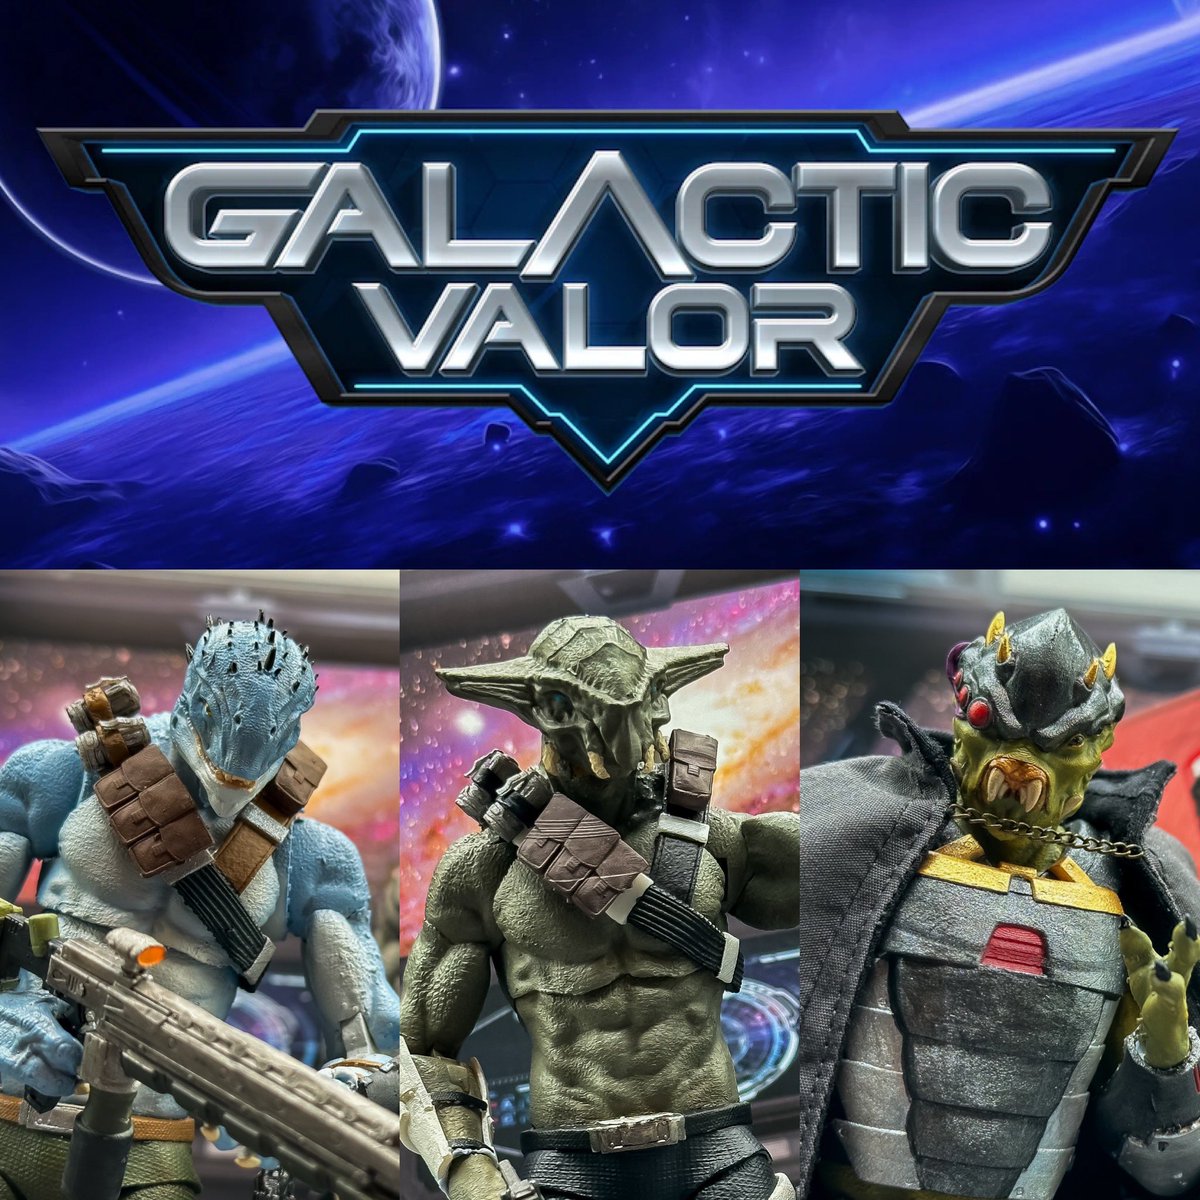 📌KICKSTARTER BOOKMARK📌

The @kickstarter bookmark page for the upcoming @foxforgetoys #GalacticValor project is LIVE! Tap the link below to sign up to be notified when the project launches! 🚀 

kickstarter.com/projects/foxfo…

#toys #foxforgetoys #kickstarter #crowdfund #nj #newjersey